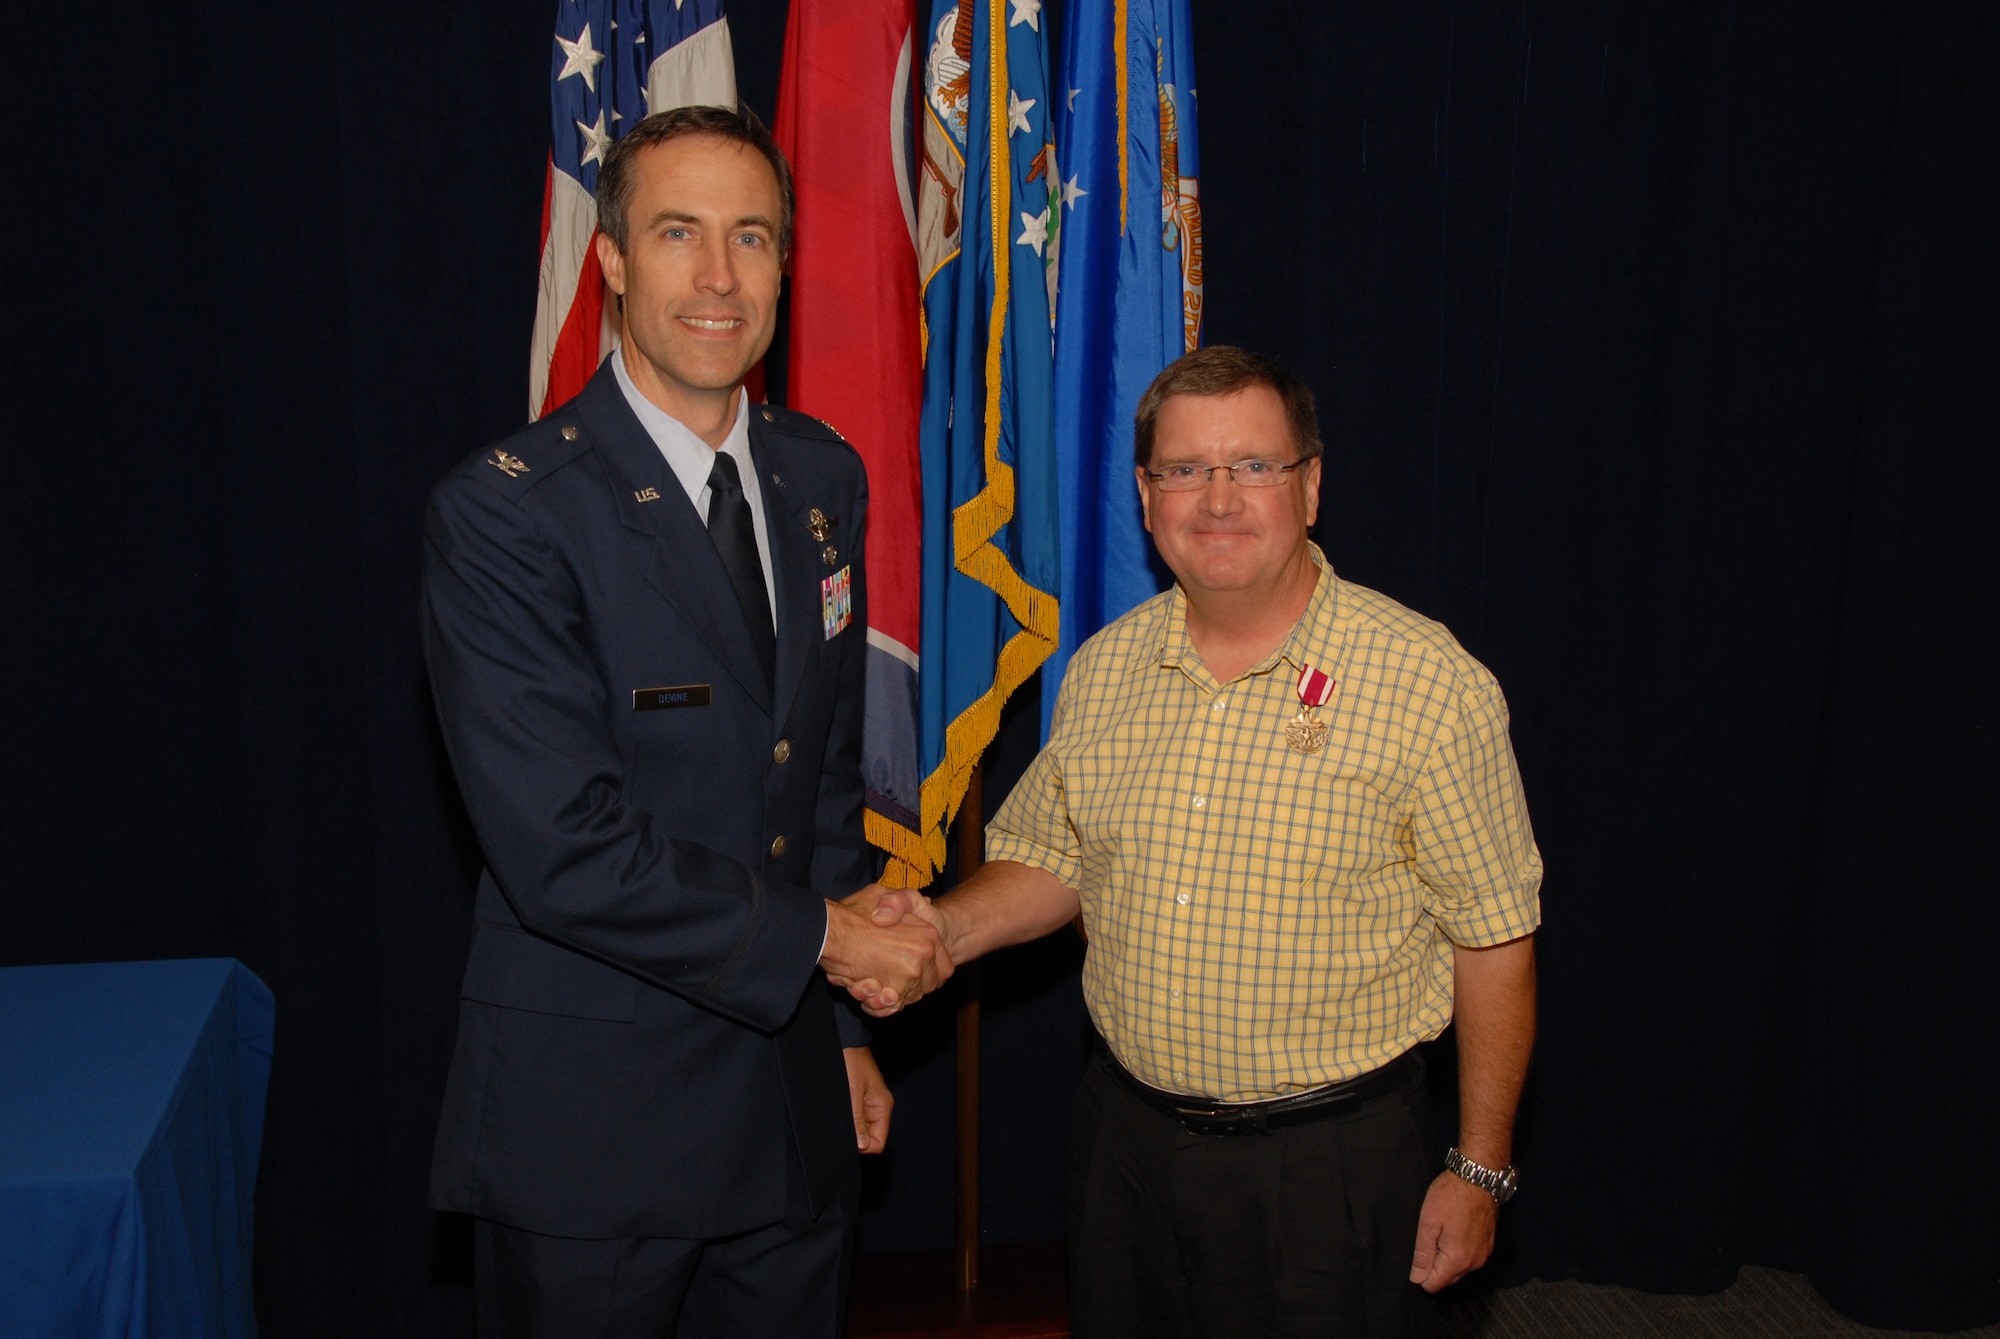 Mark E. Brown, retired Lieutenant Colonel, poses with Colonel Mark J. Devine, 164th Airlift Wing Vice Commander, after being awarded the Meritorious Service Medal during his retirement ceremony on June 4th, 2011.